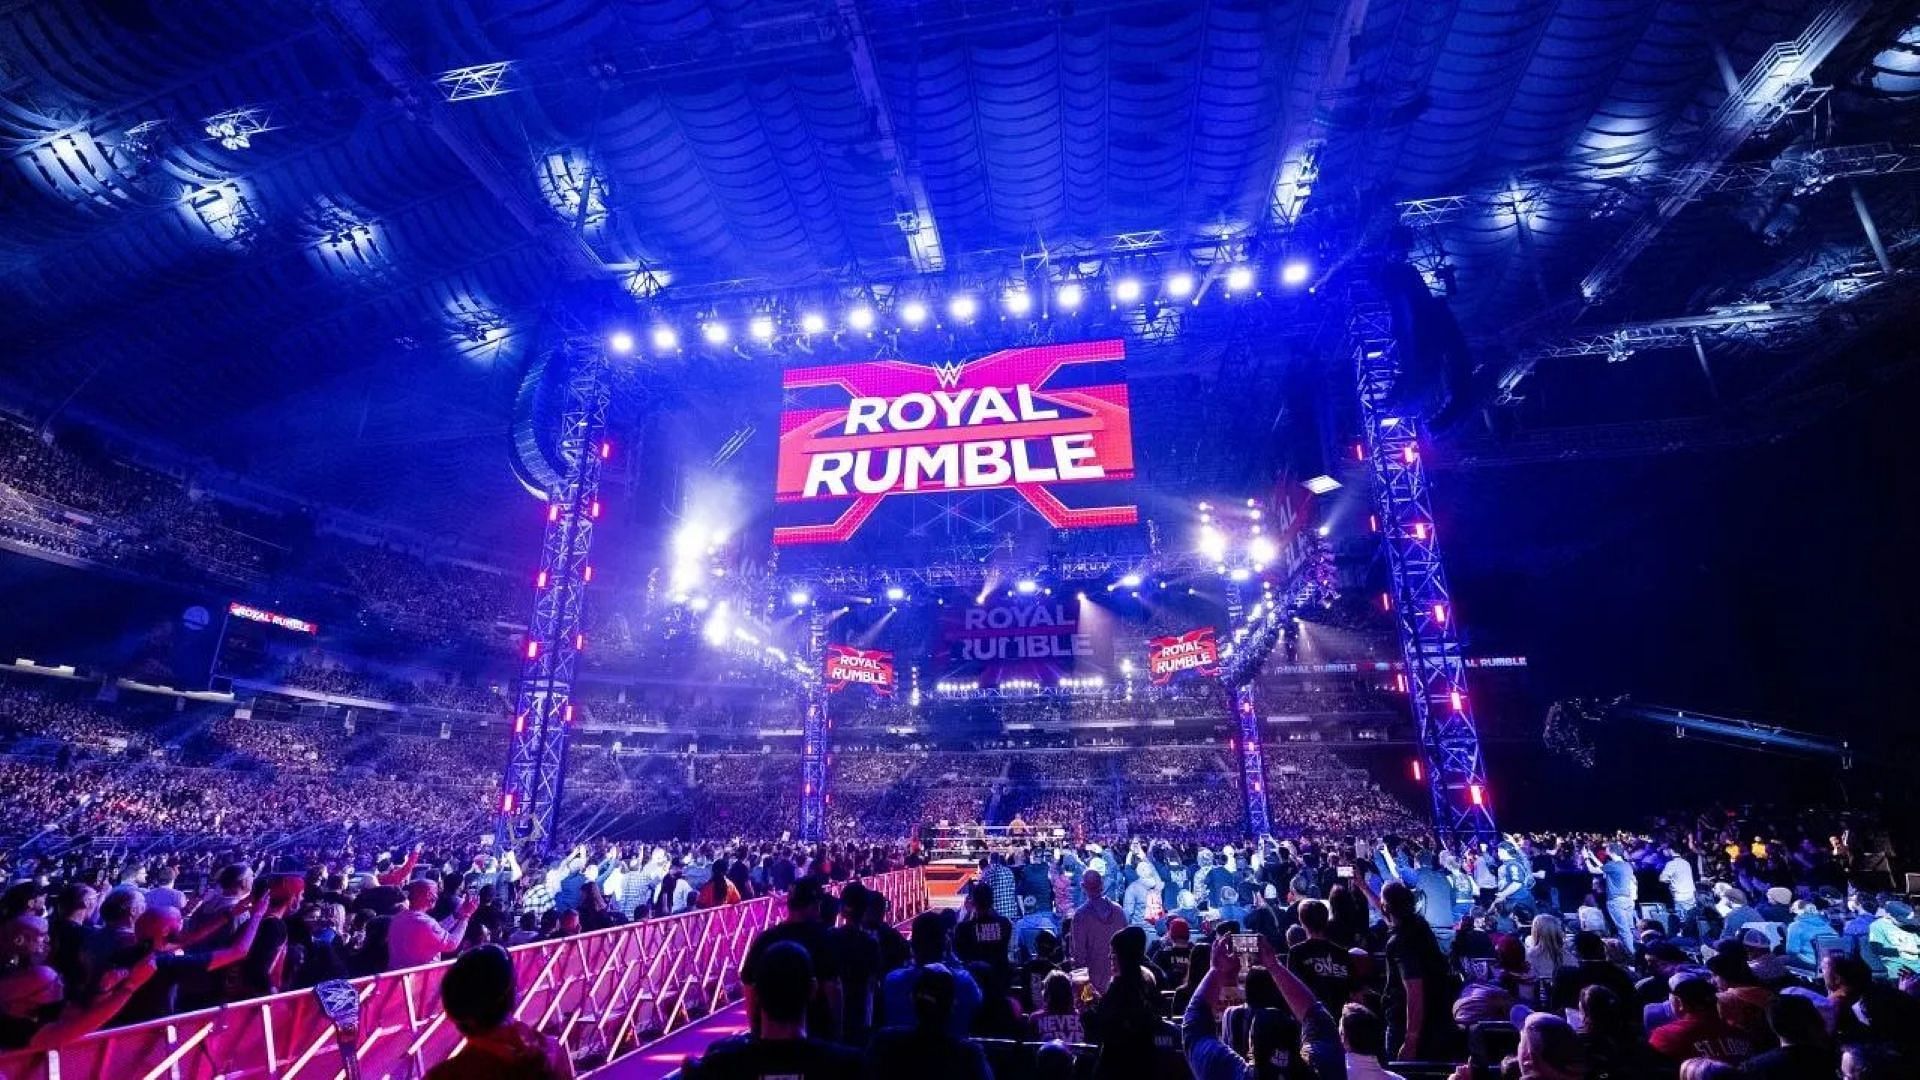 The WWE Royal Rumble logo and ring on display inside arena